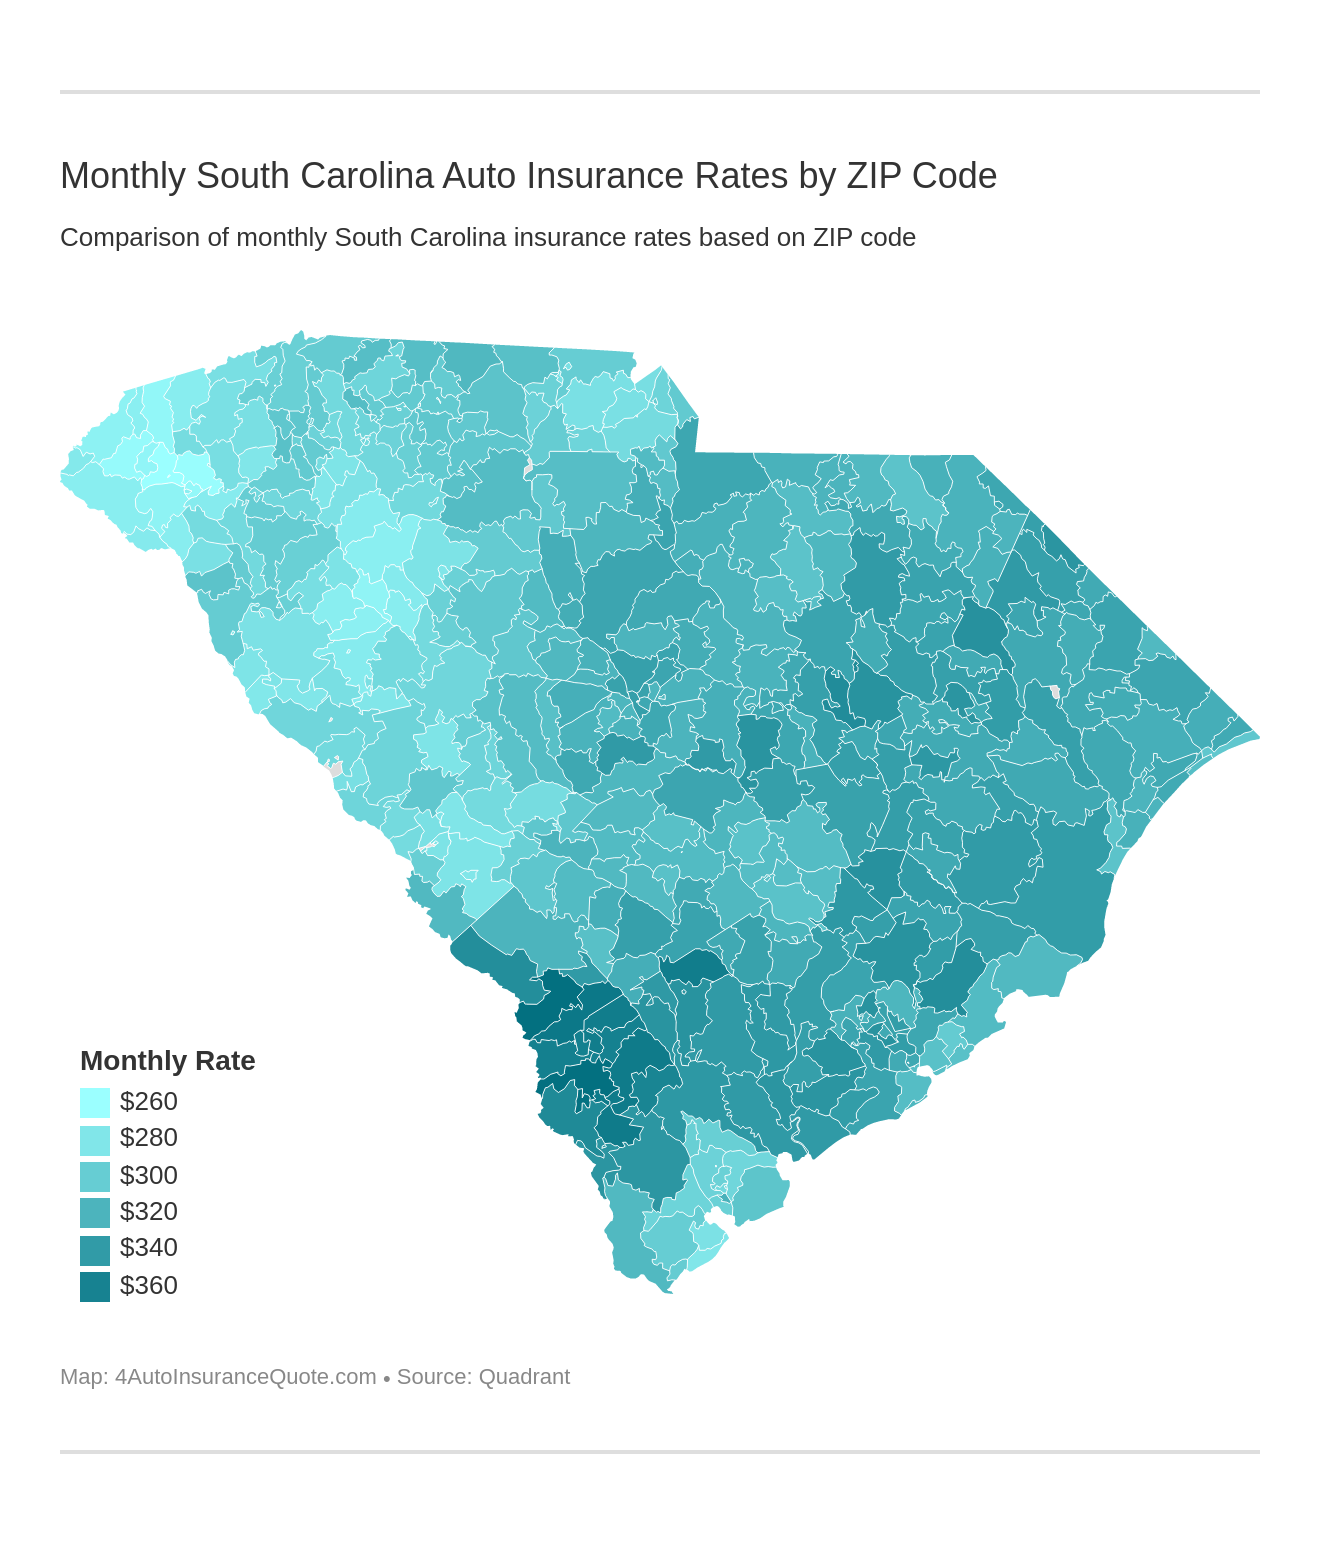 Monthly South Carolina Auto Insurance Rates by ZIP Code